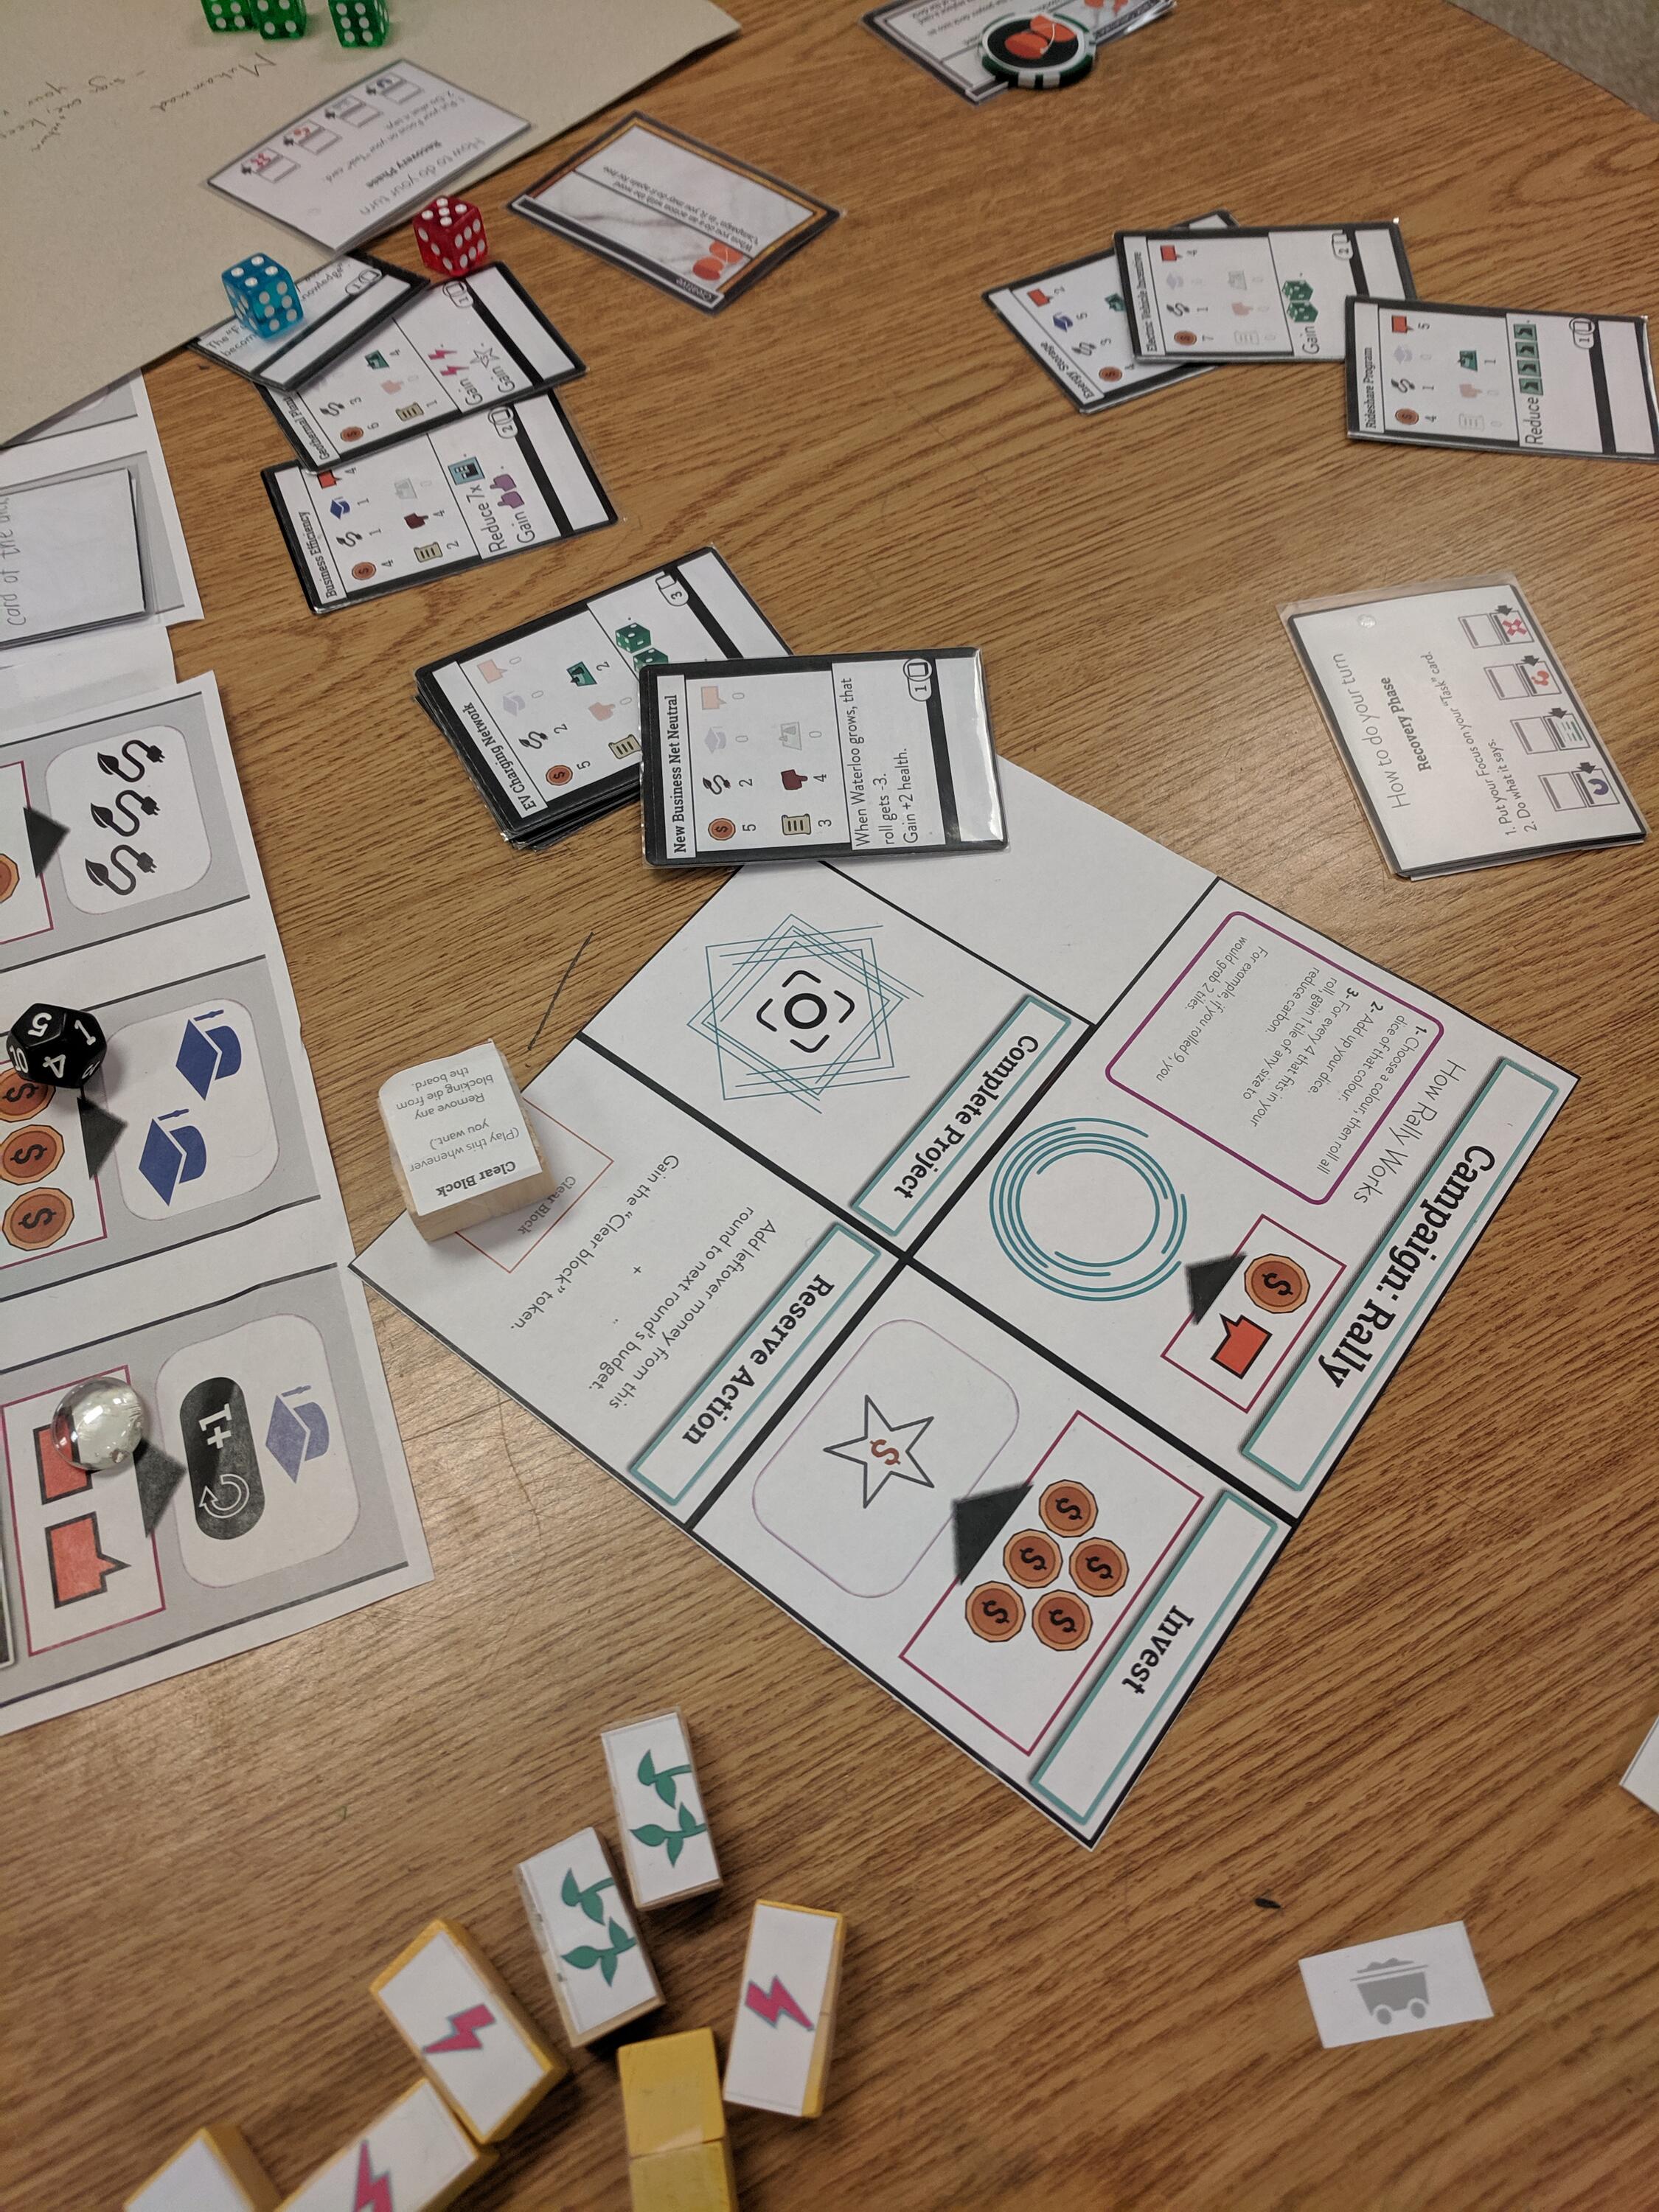 Early printed prototype of Energize